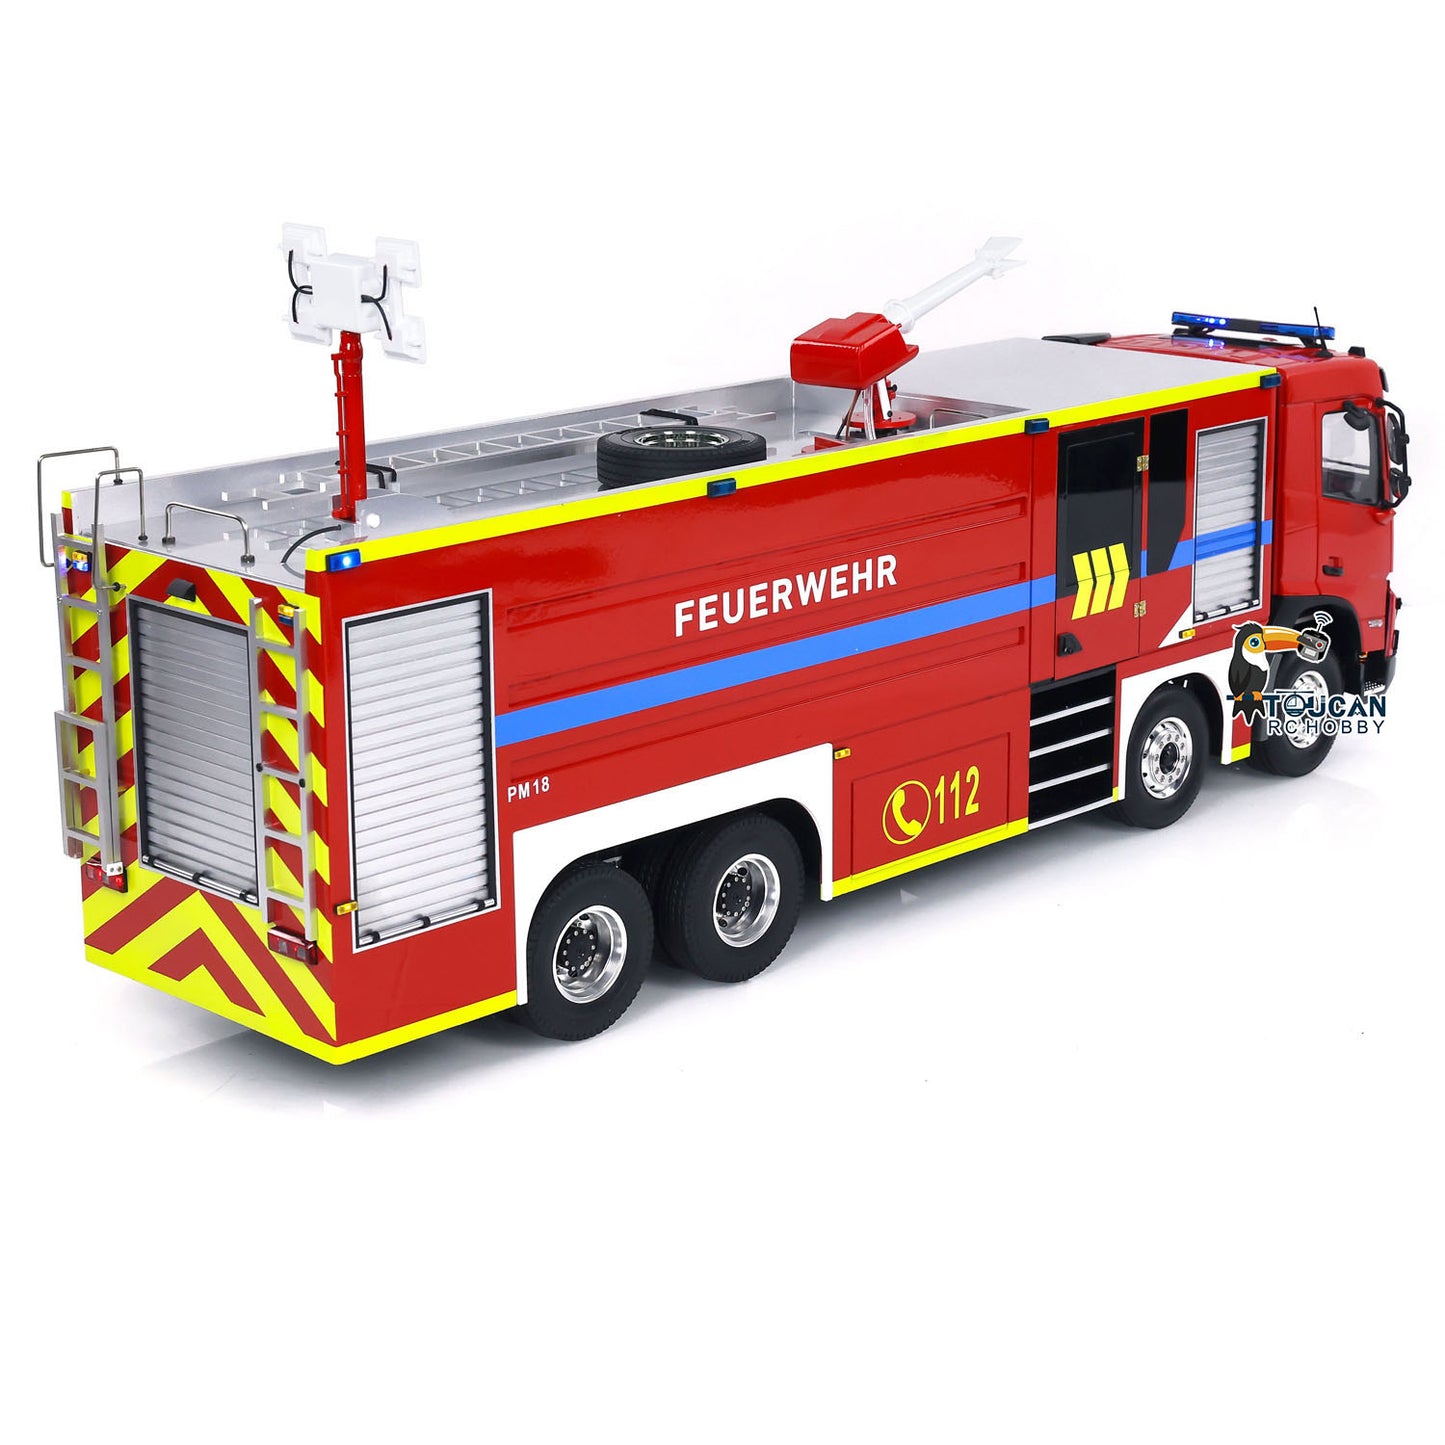 IN STOCK 1/14 8x4 FMX PS0003 RC Fire Fighting Vehicles Remote Control Extinguisher Truck Hobby Model Lights Sounds Ready to Run